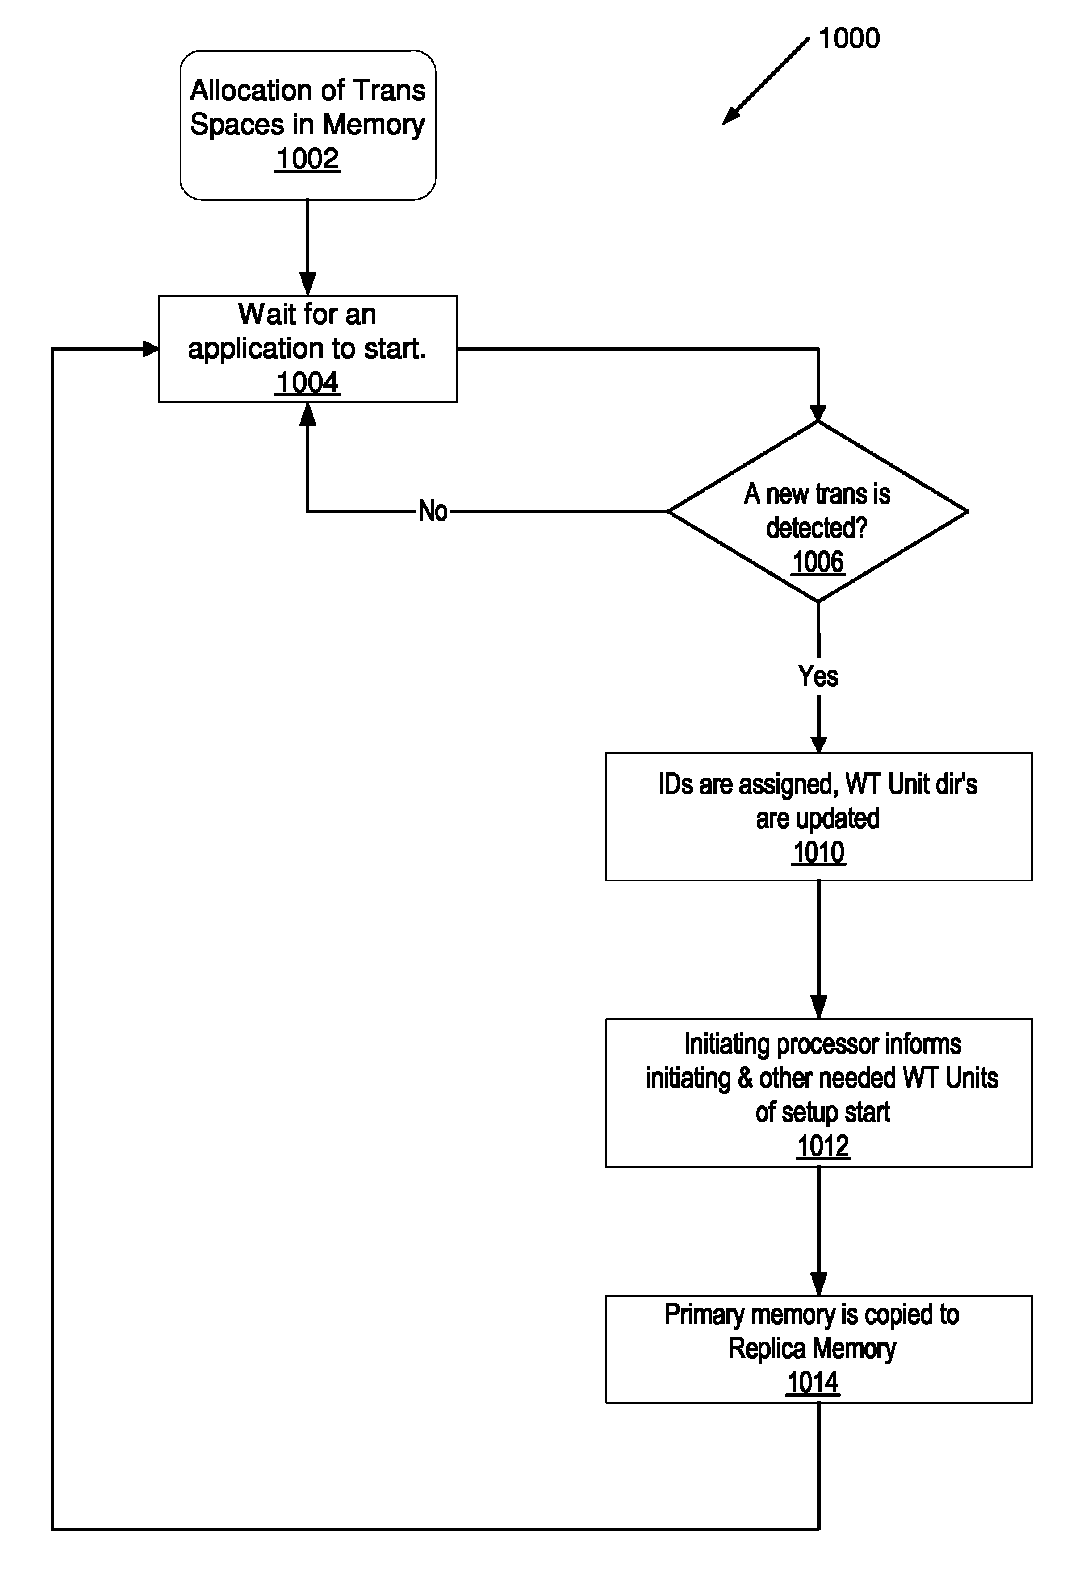 Efficient hardware scheme to support cross-cluster transactional memory